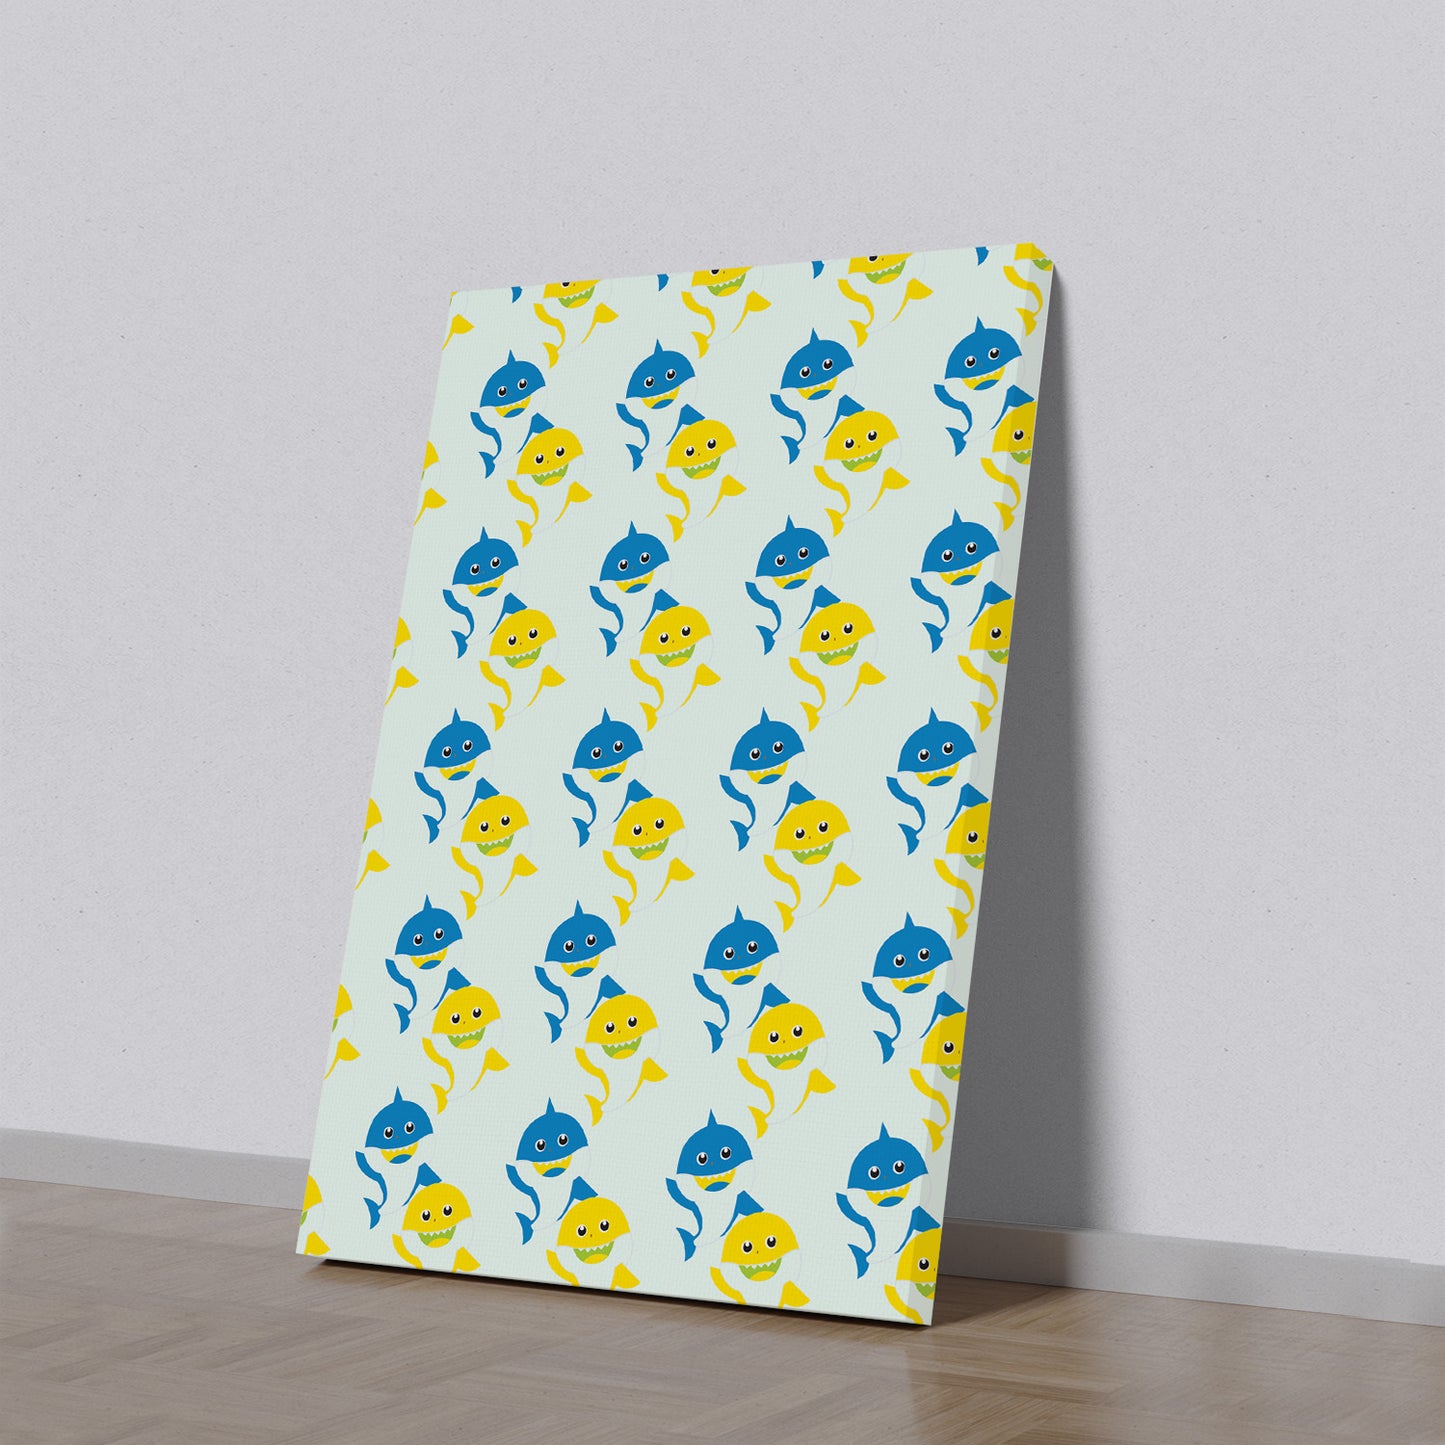 Blue and Yellow Fish Pattern Canvas Wall Painting